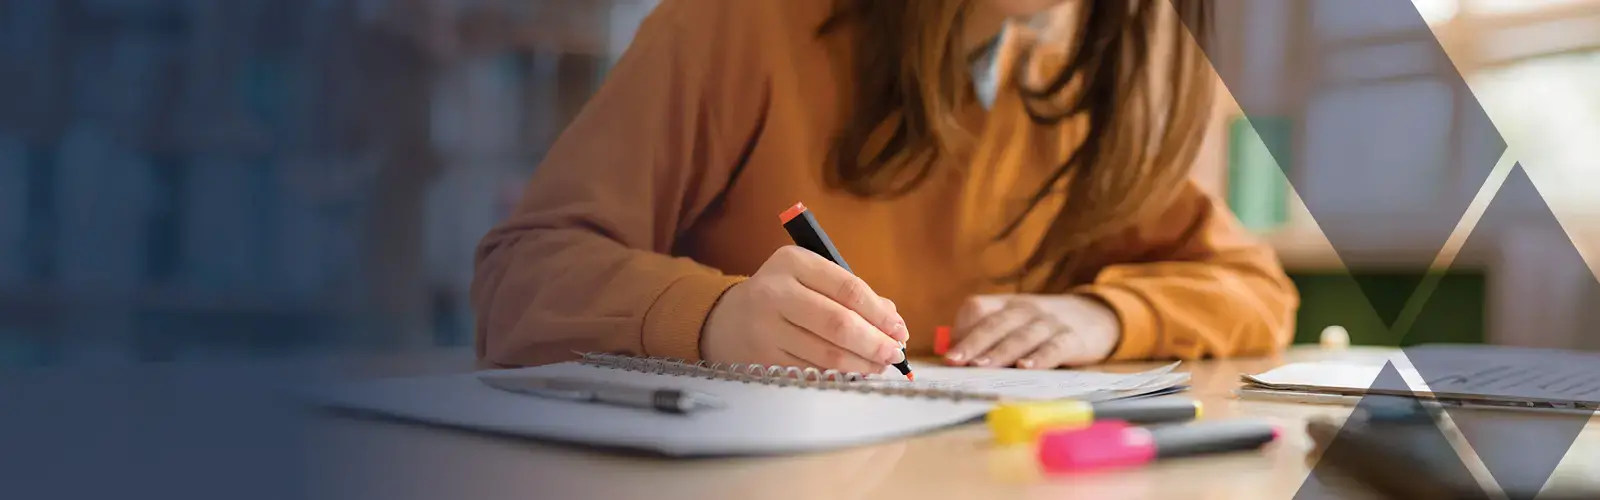 Woman highlighting text on document with highlighters on a desk 